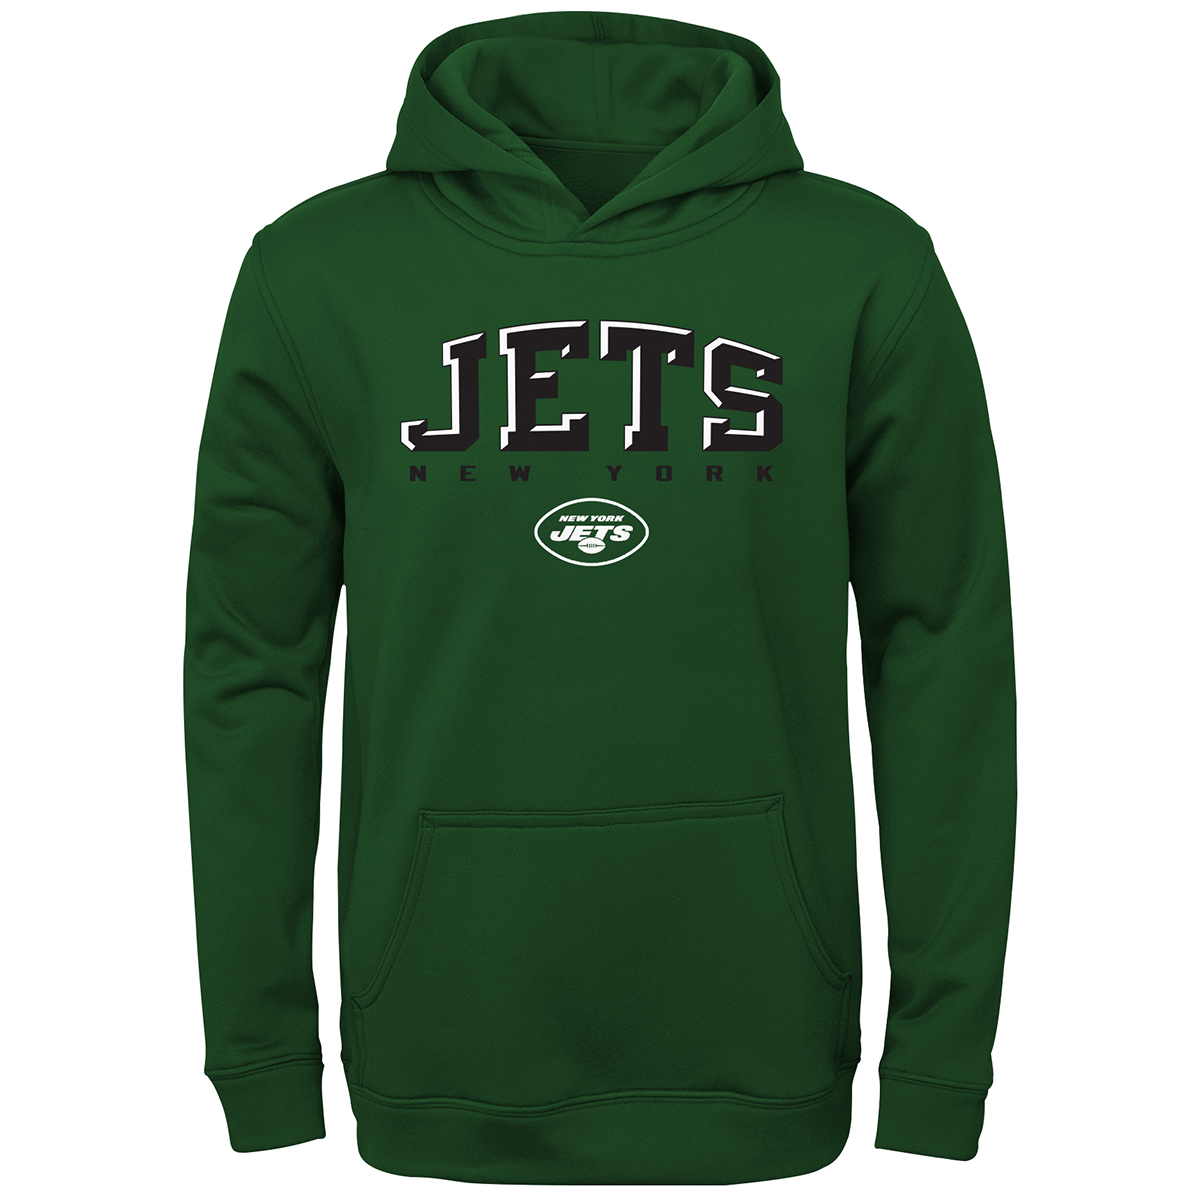 New York Jets Boys' Adapt Pullover Hoodie - Green, S